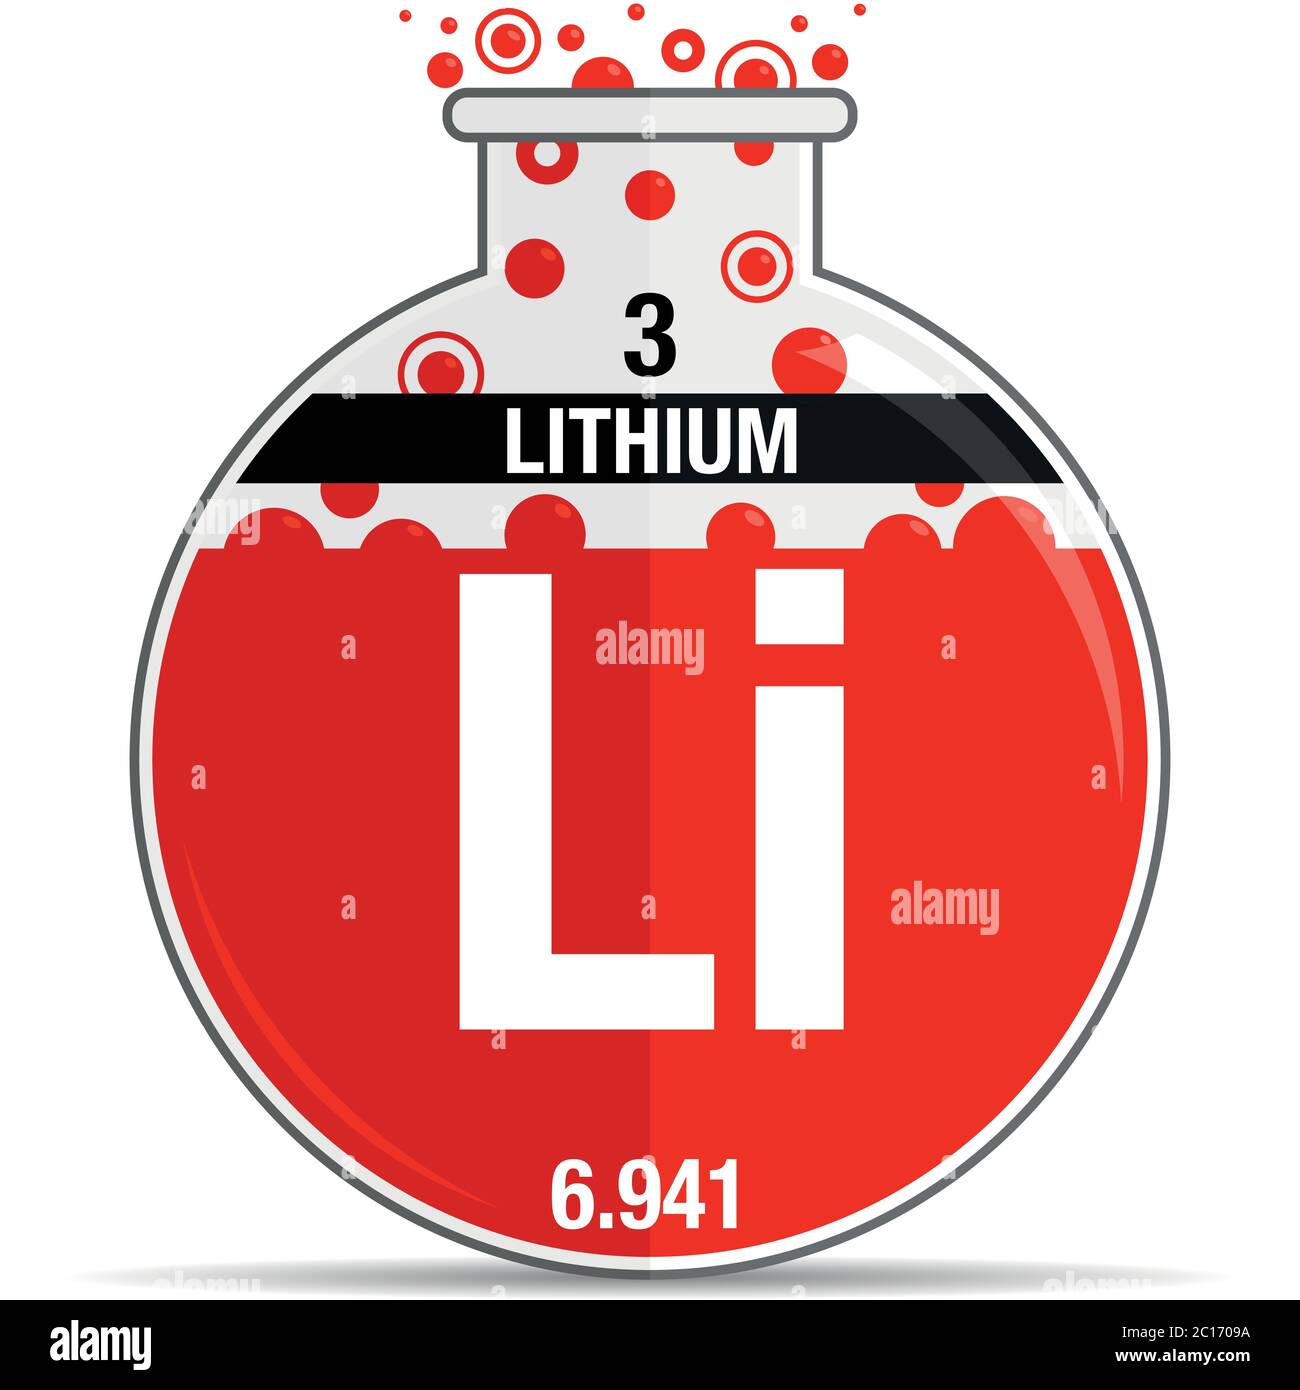 Lithium symbol on chemical round flask. Element number 3 of the Periodic Table of the Elements - Chemistry. Vector image Stock Vector